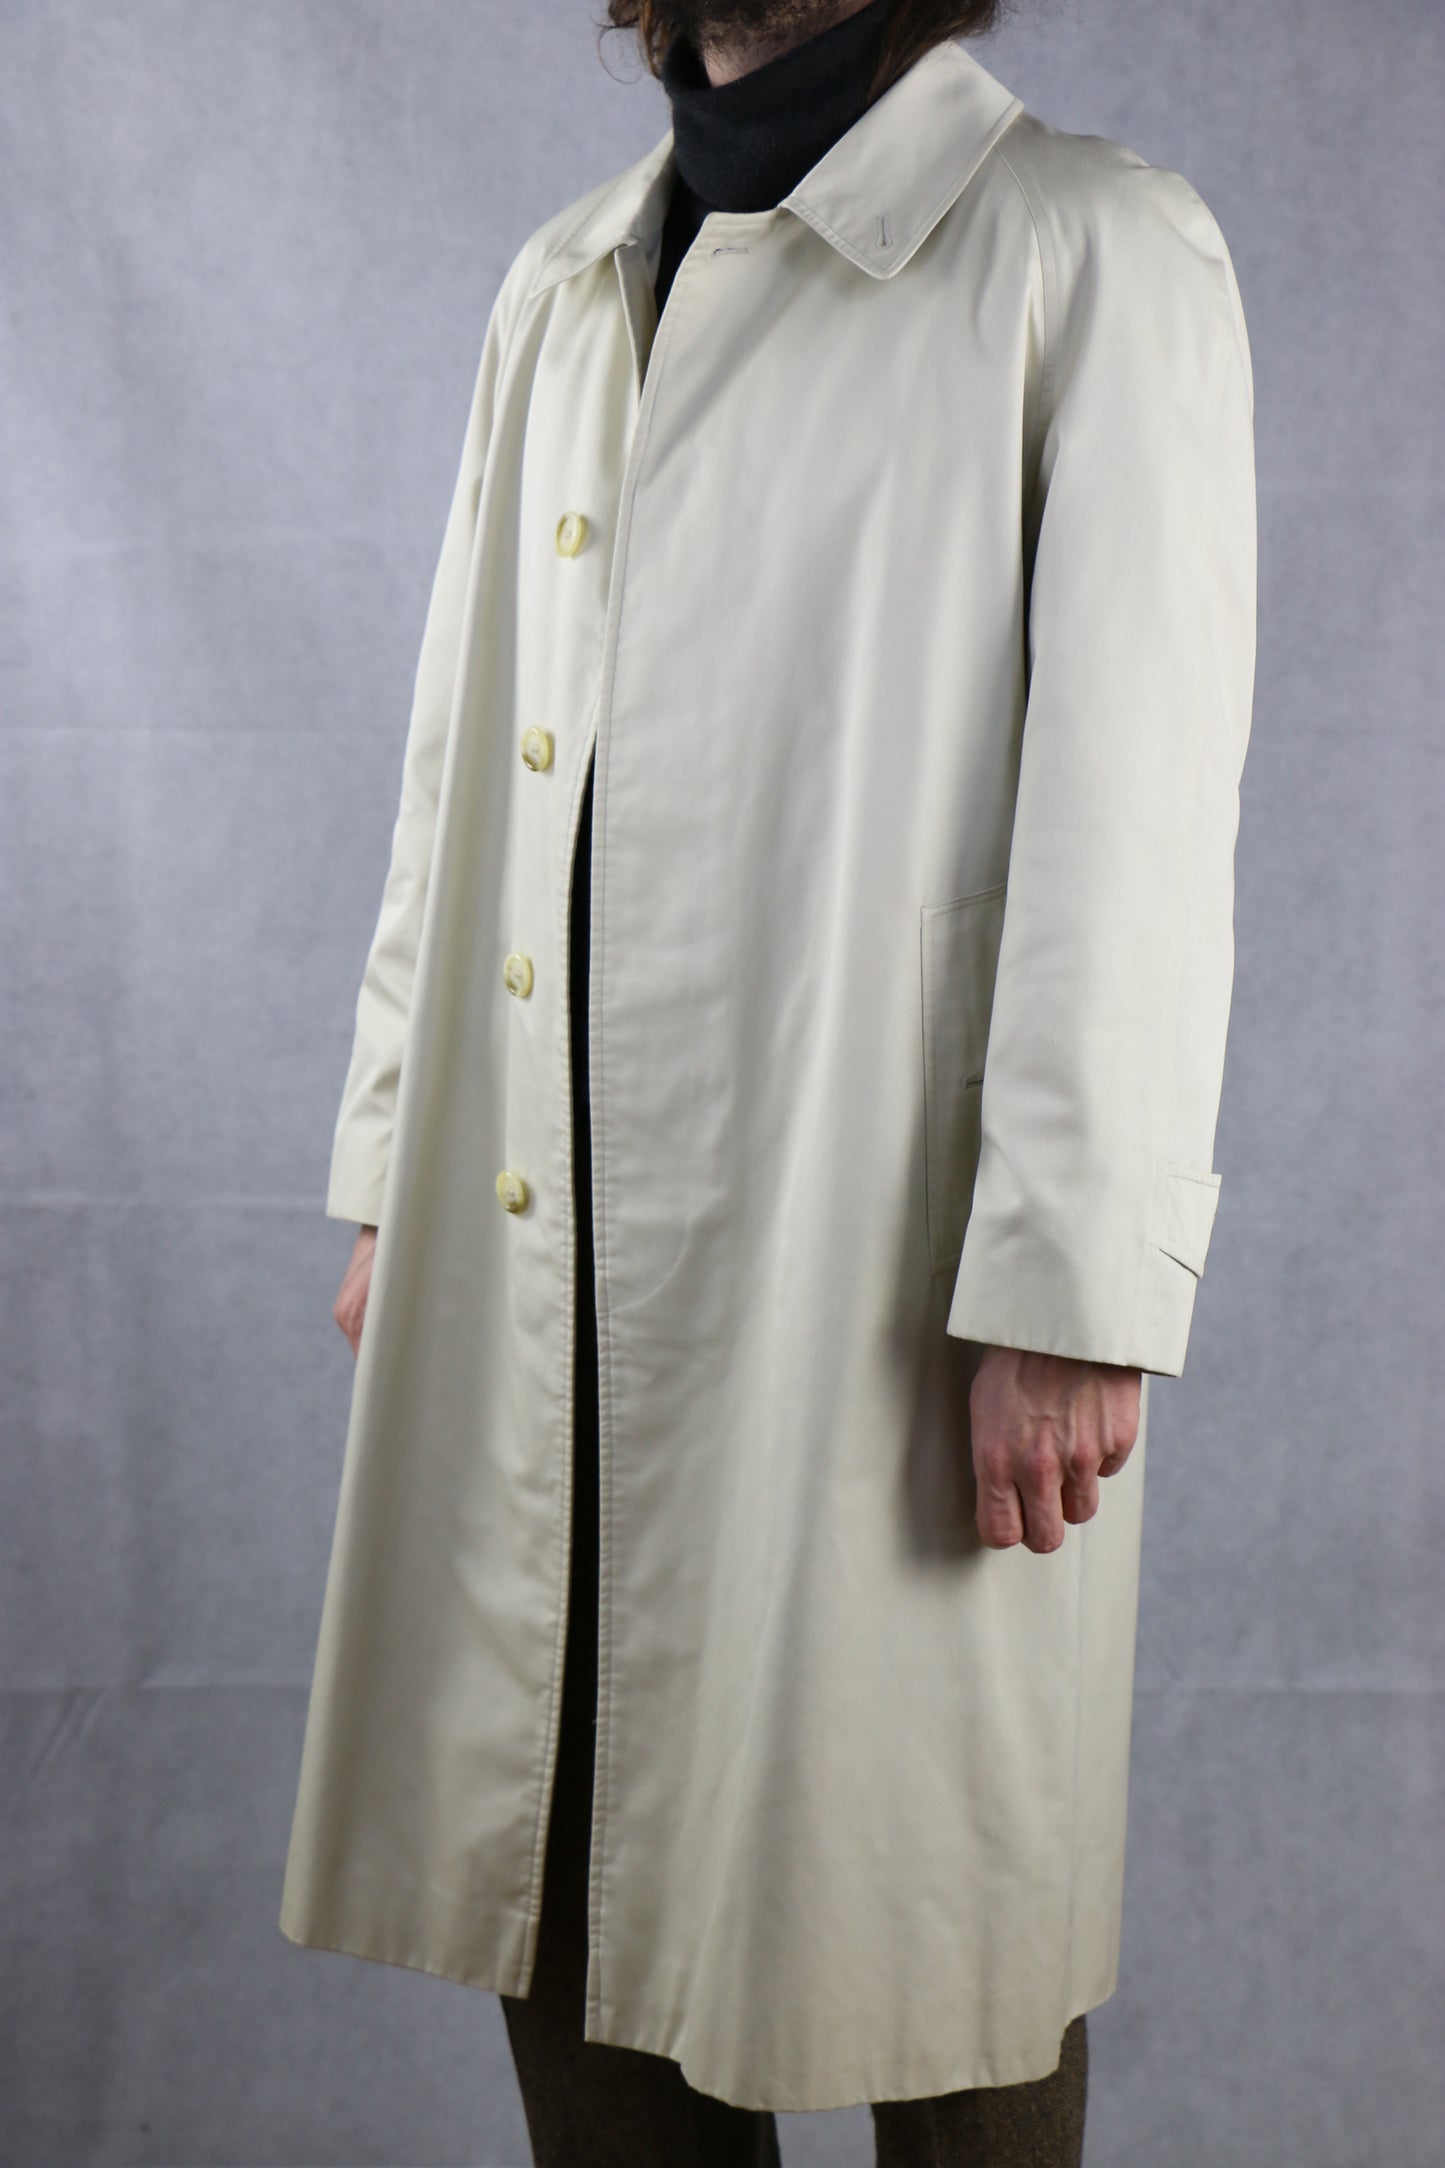 Burberrys' Trench Coat 'Made in England' M, clochard92.com